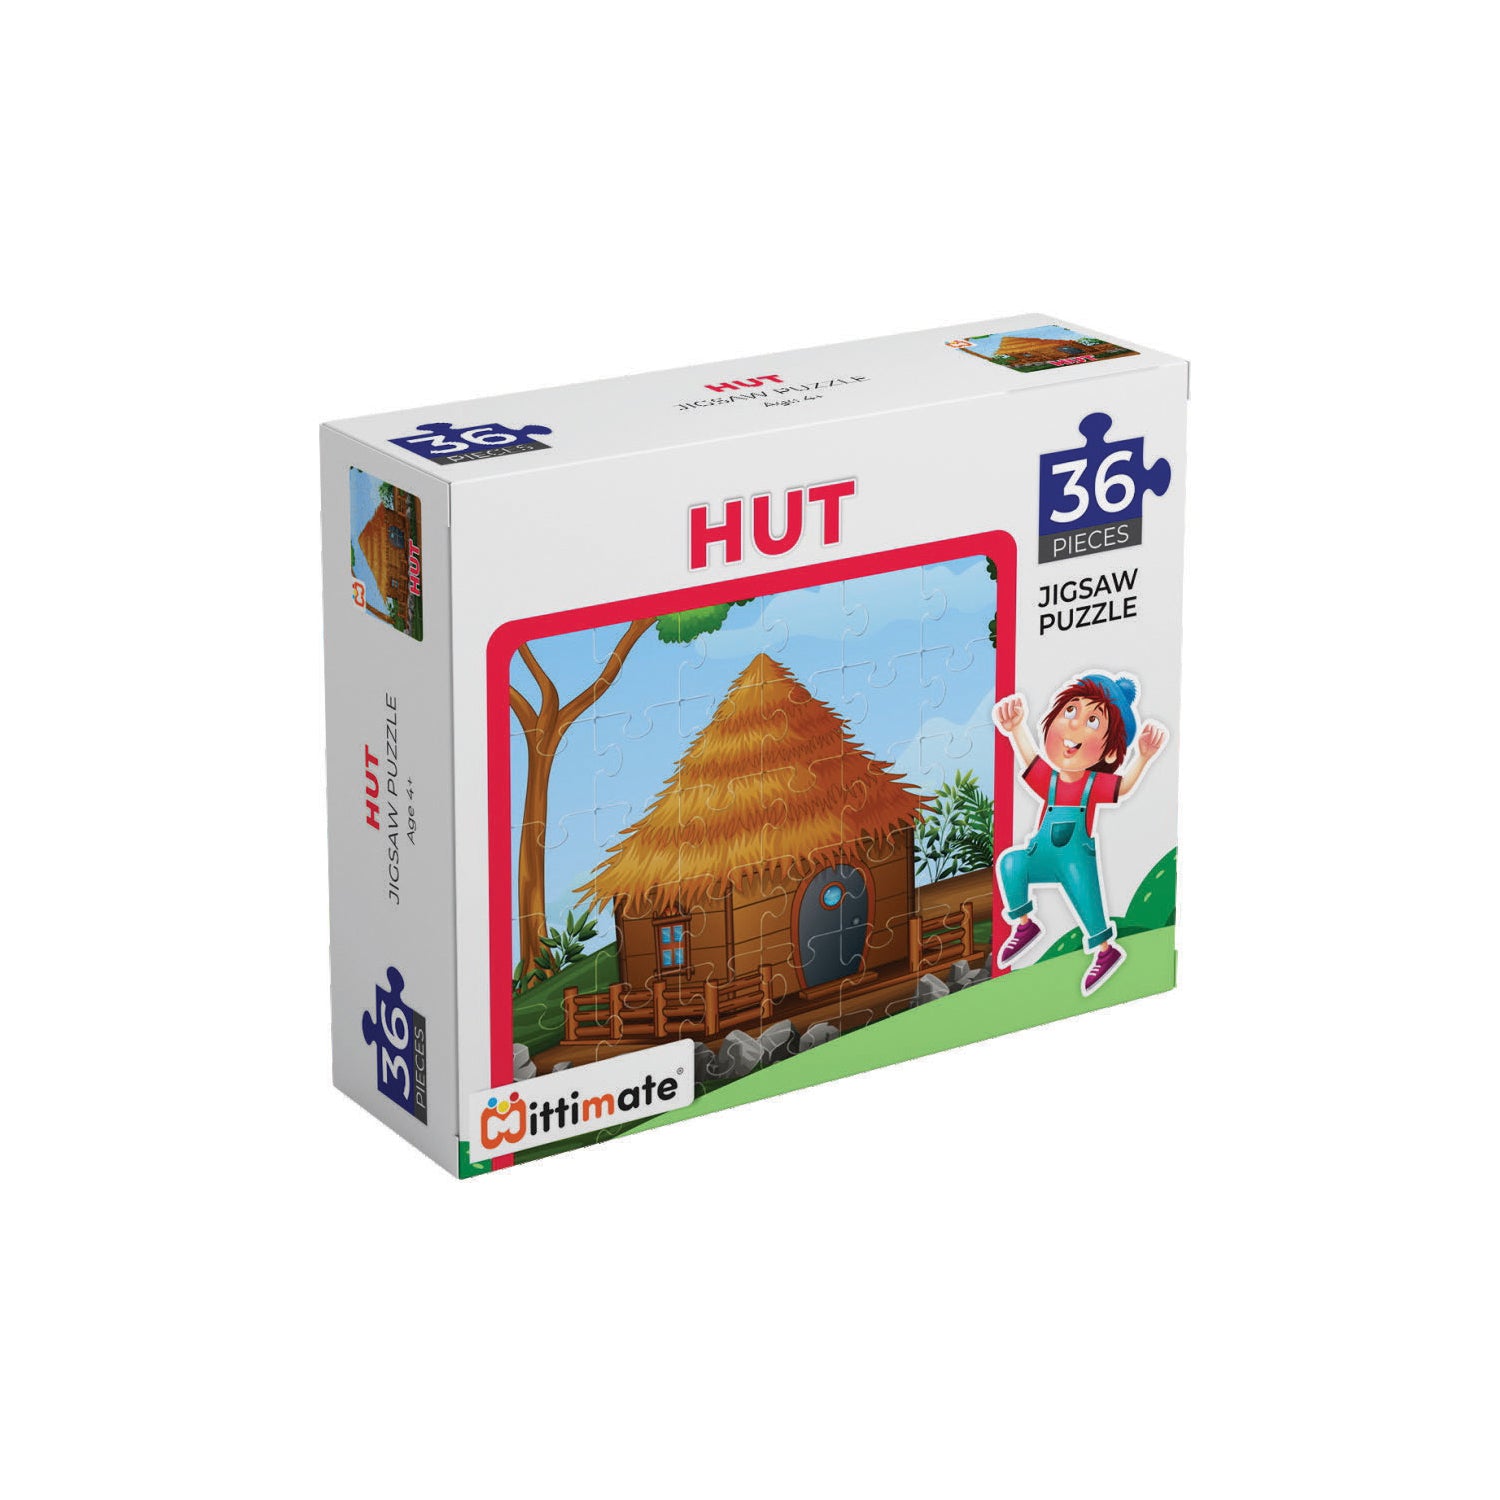 Hut Jigsaw Puzzles | Fun & Learning Games for kids - Mittimate